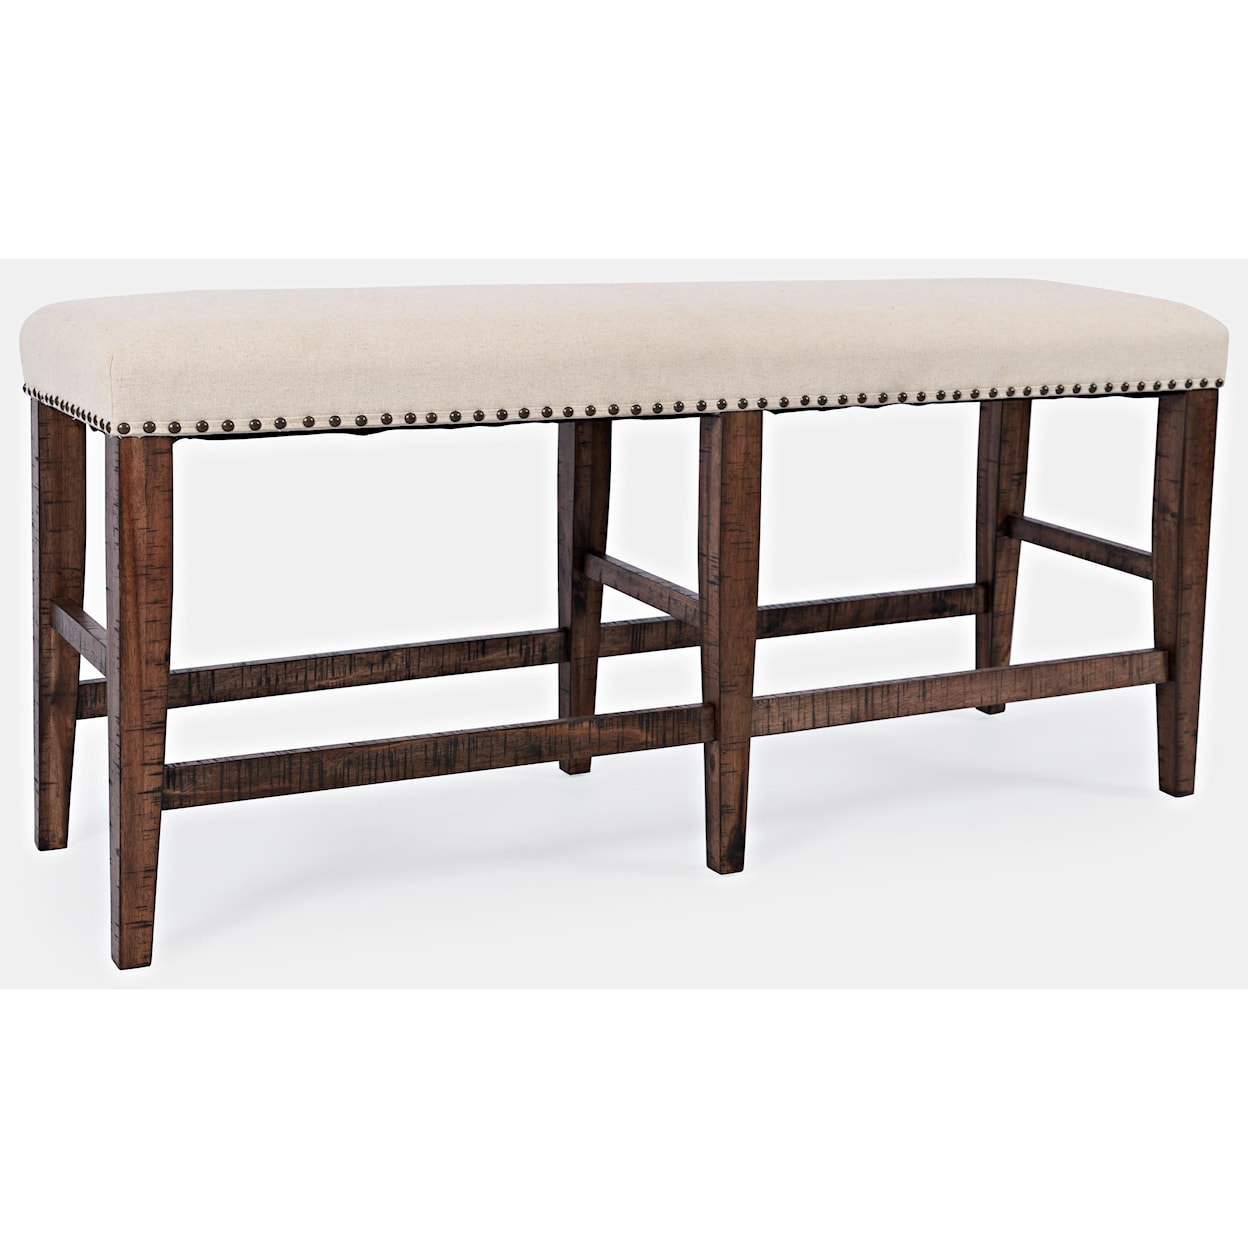 Jofran Fairview Backless Counter Bench